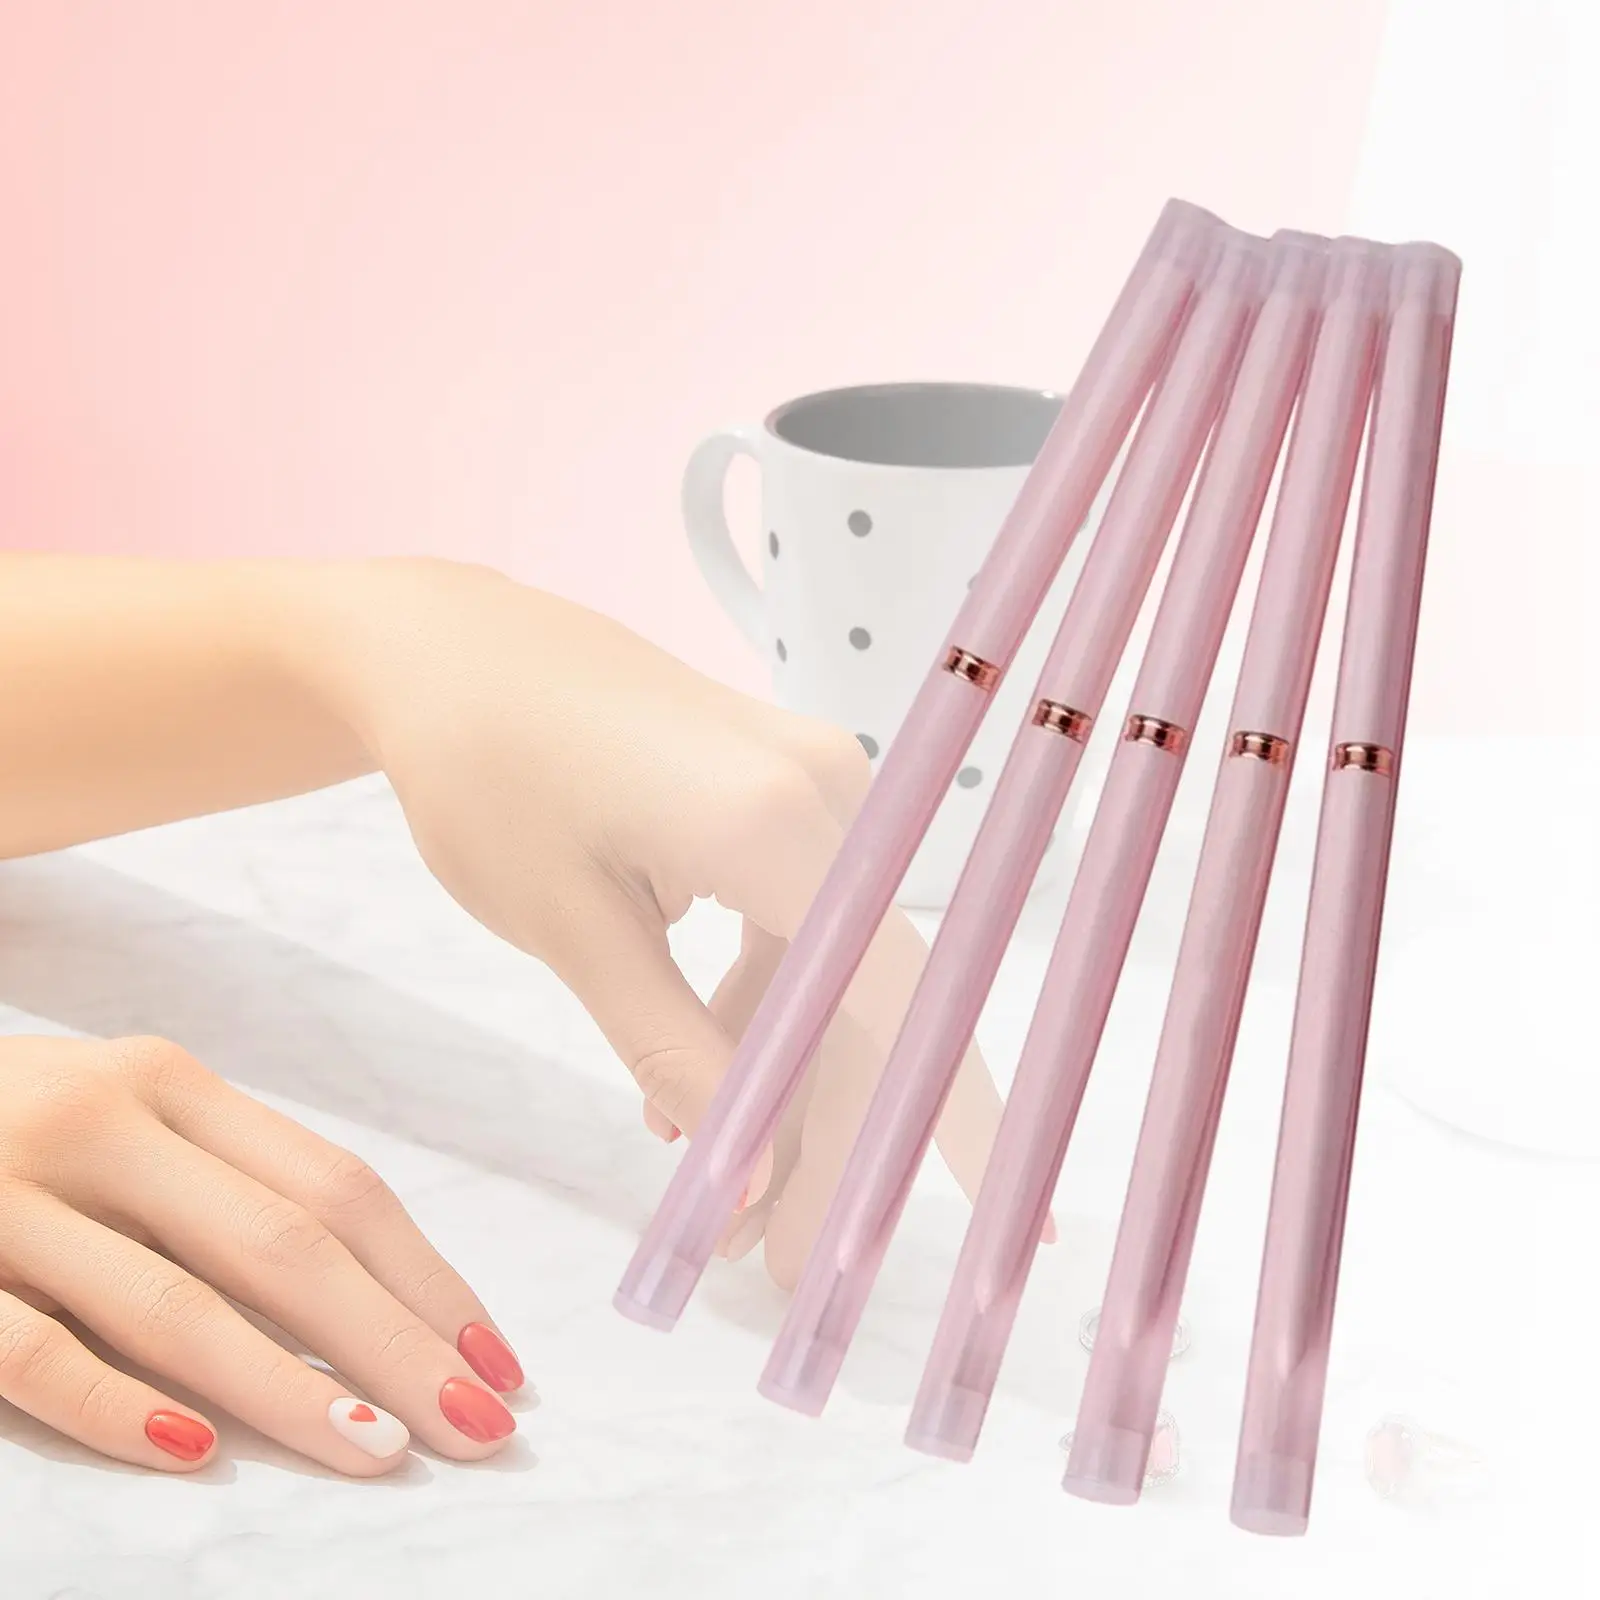 5 Pieces Nail Art Liner Brush Set for Thin Details Nail Art Fine Designs